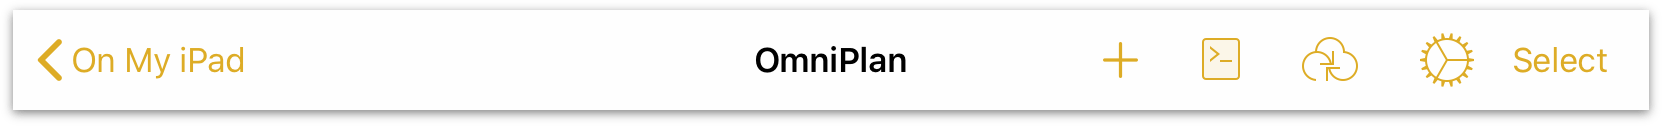 The toolbar you see at the top of your device while viewing the contents of a folder in OmniPlan's document browser